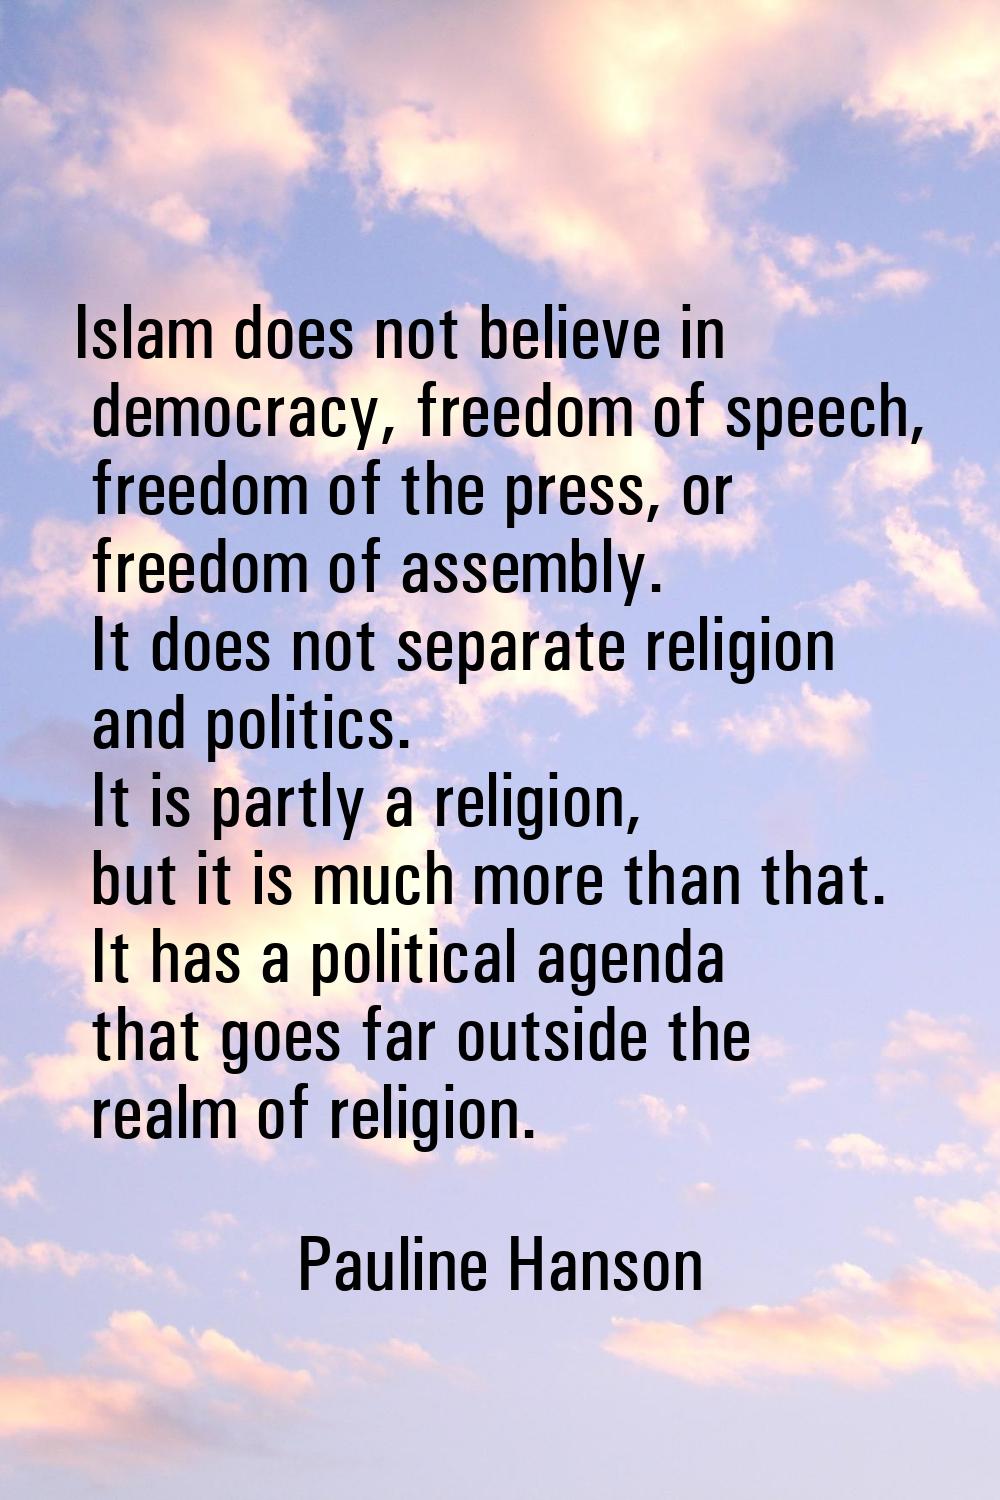 Islam does not believe in democracy, freedom of speech, freedom of the press, or freedom of assembl